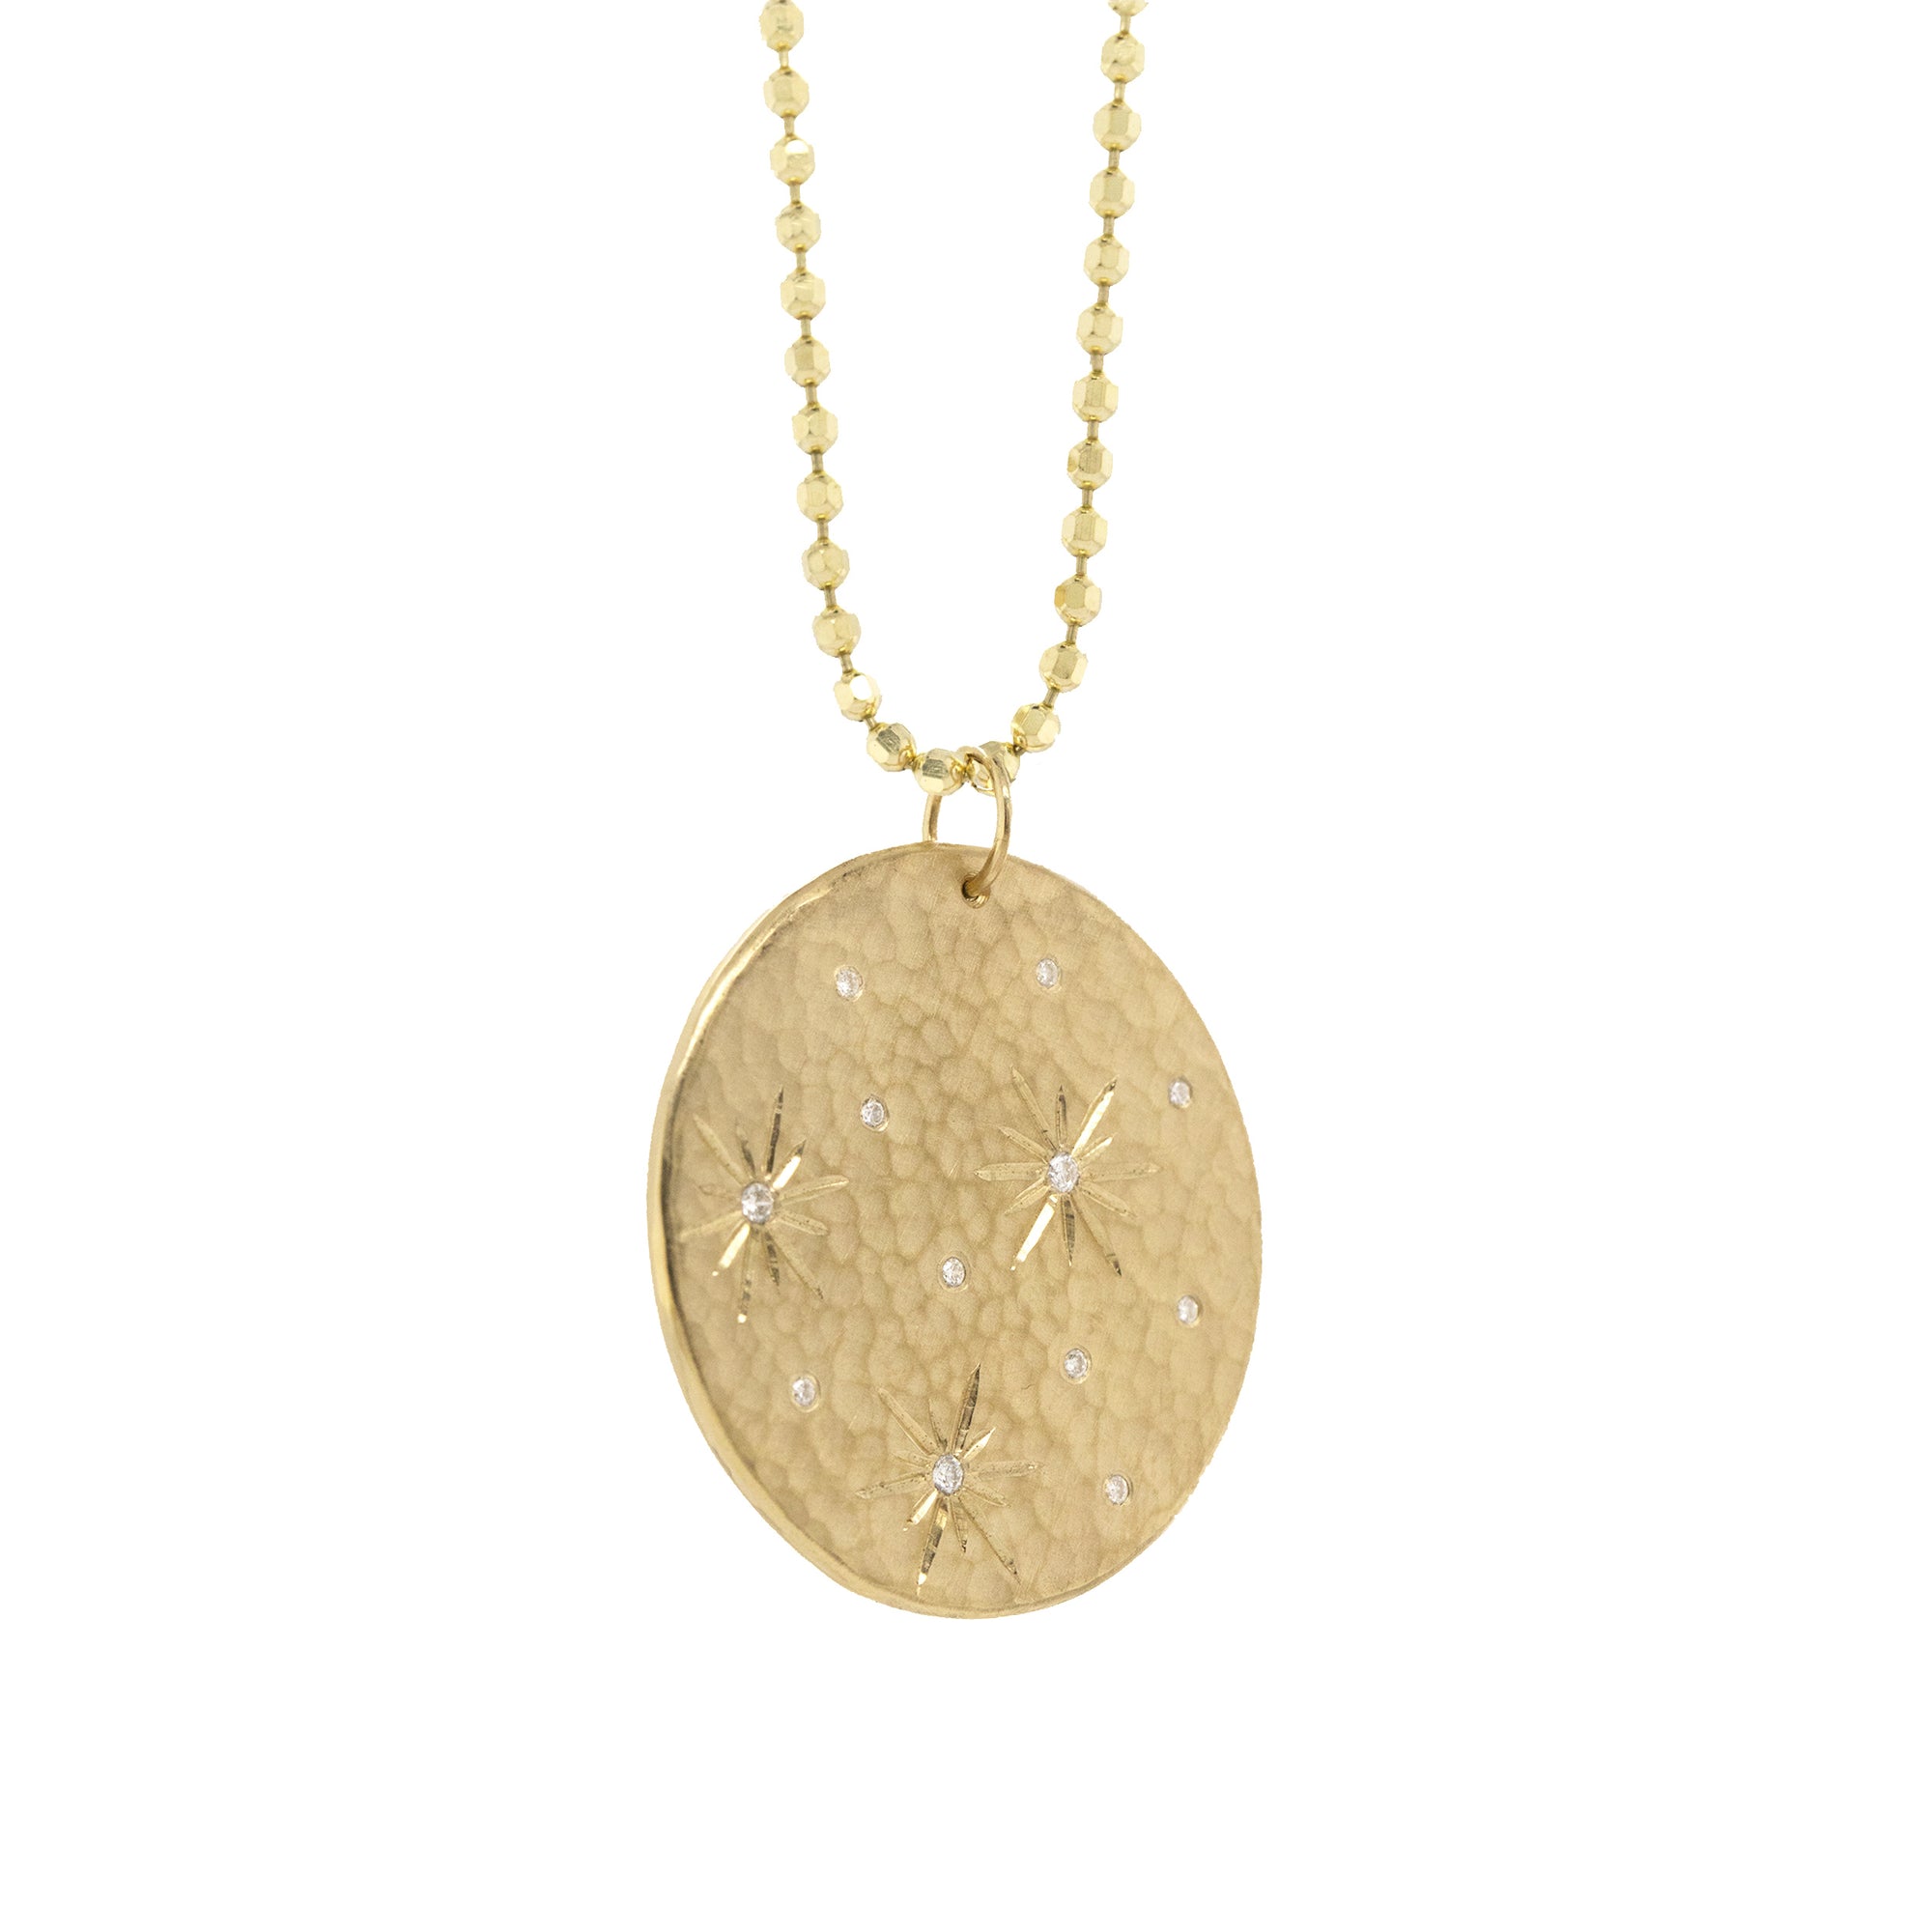 Julez Bryant 14K Gold Eclipse Medallion Yellow Gold / No Chain / Charm Only